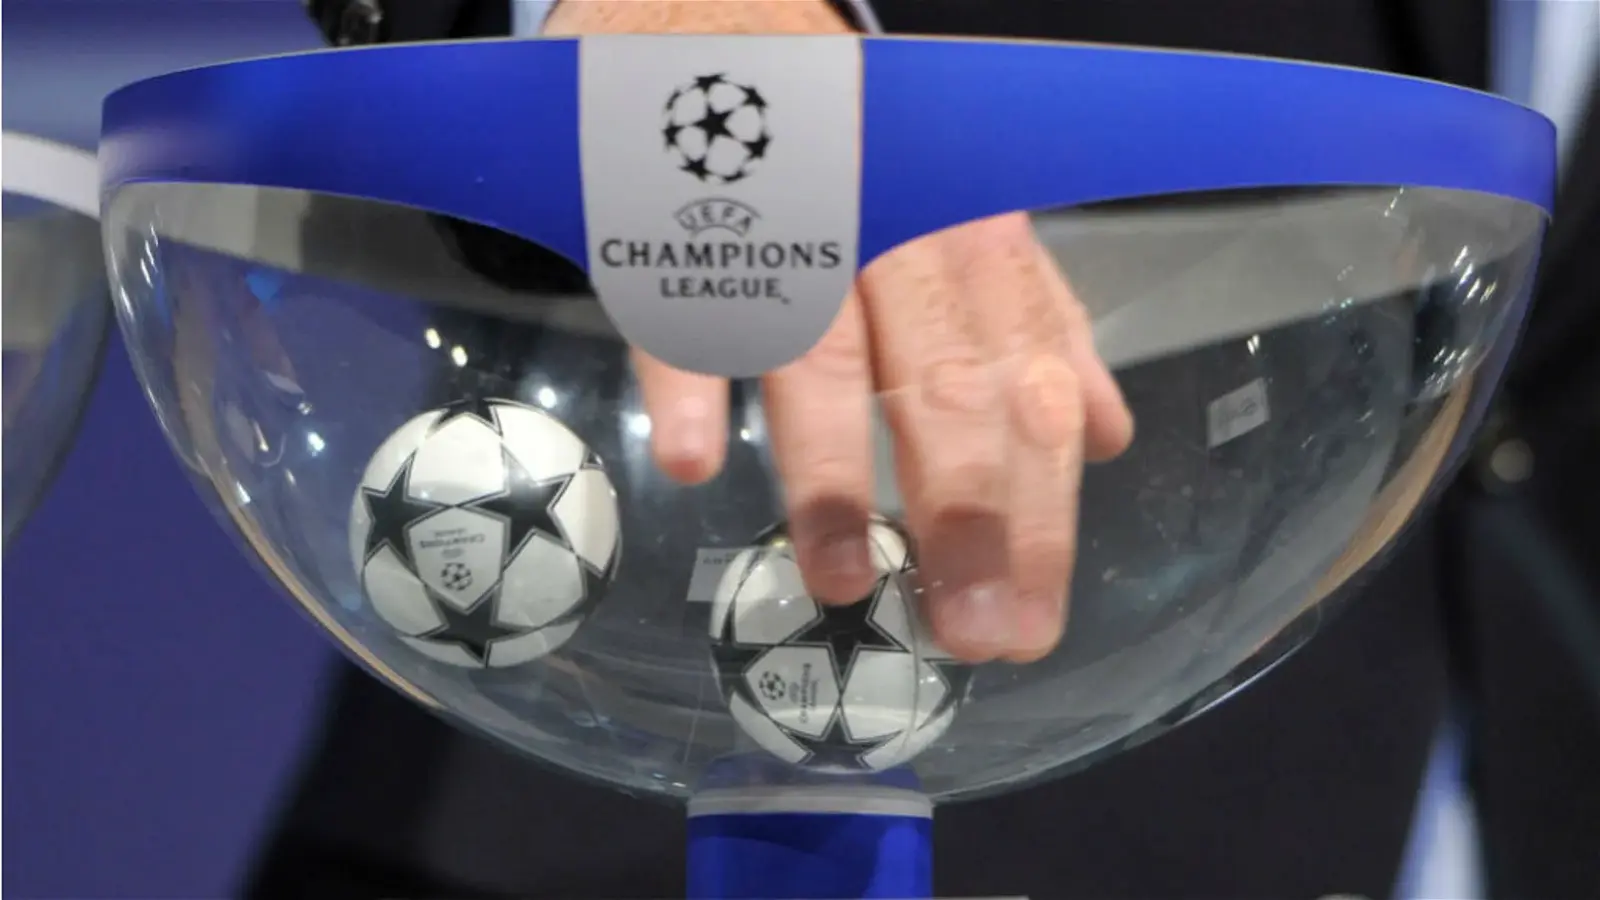 When is the Champions League quarter-final draw? - Yahoo Sports